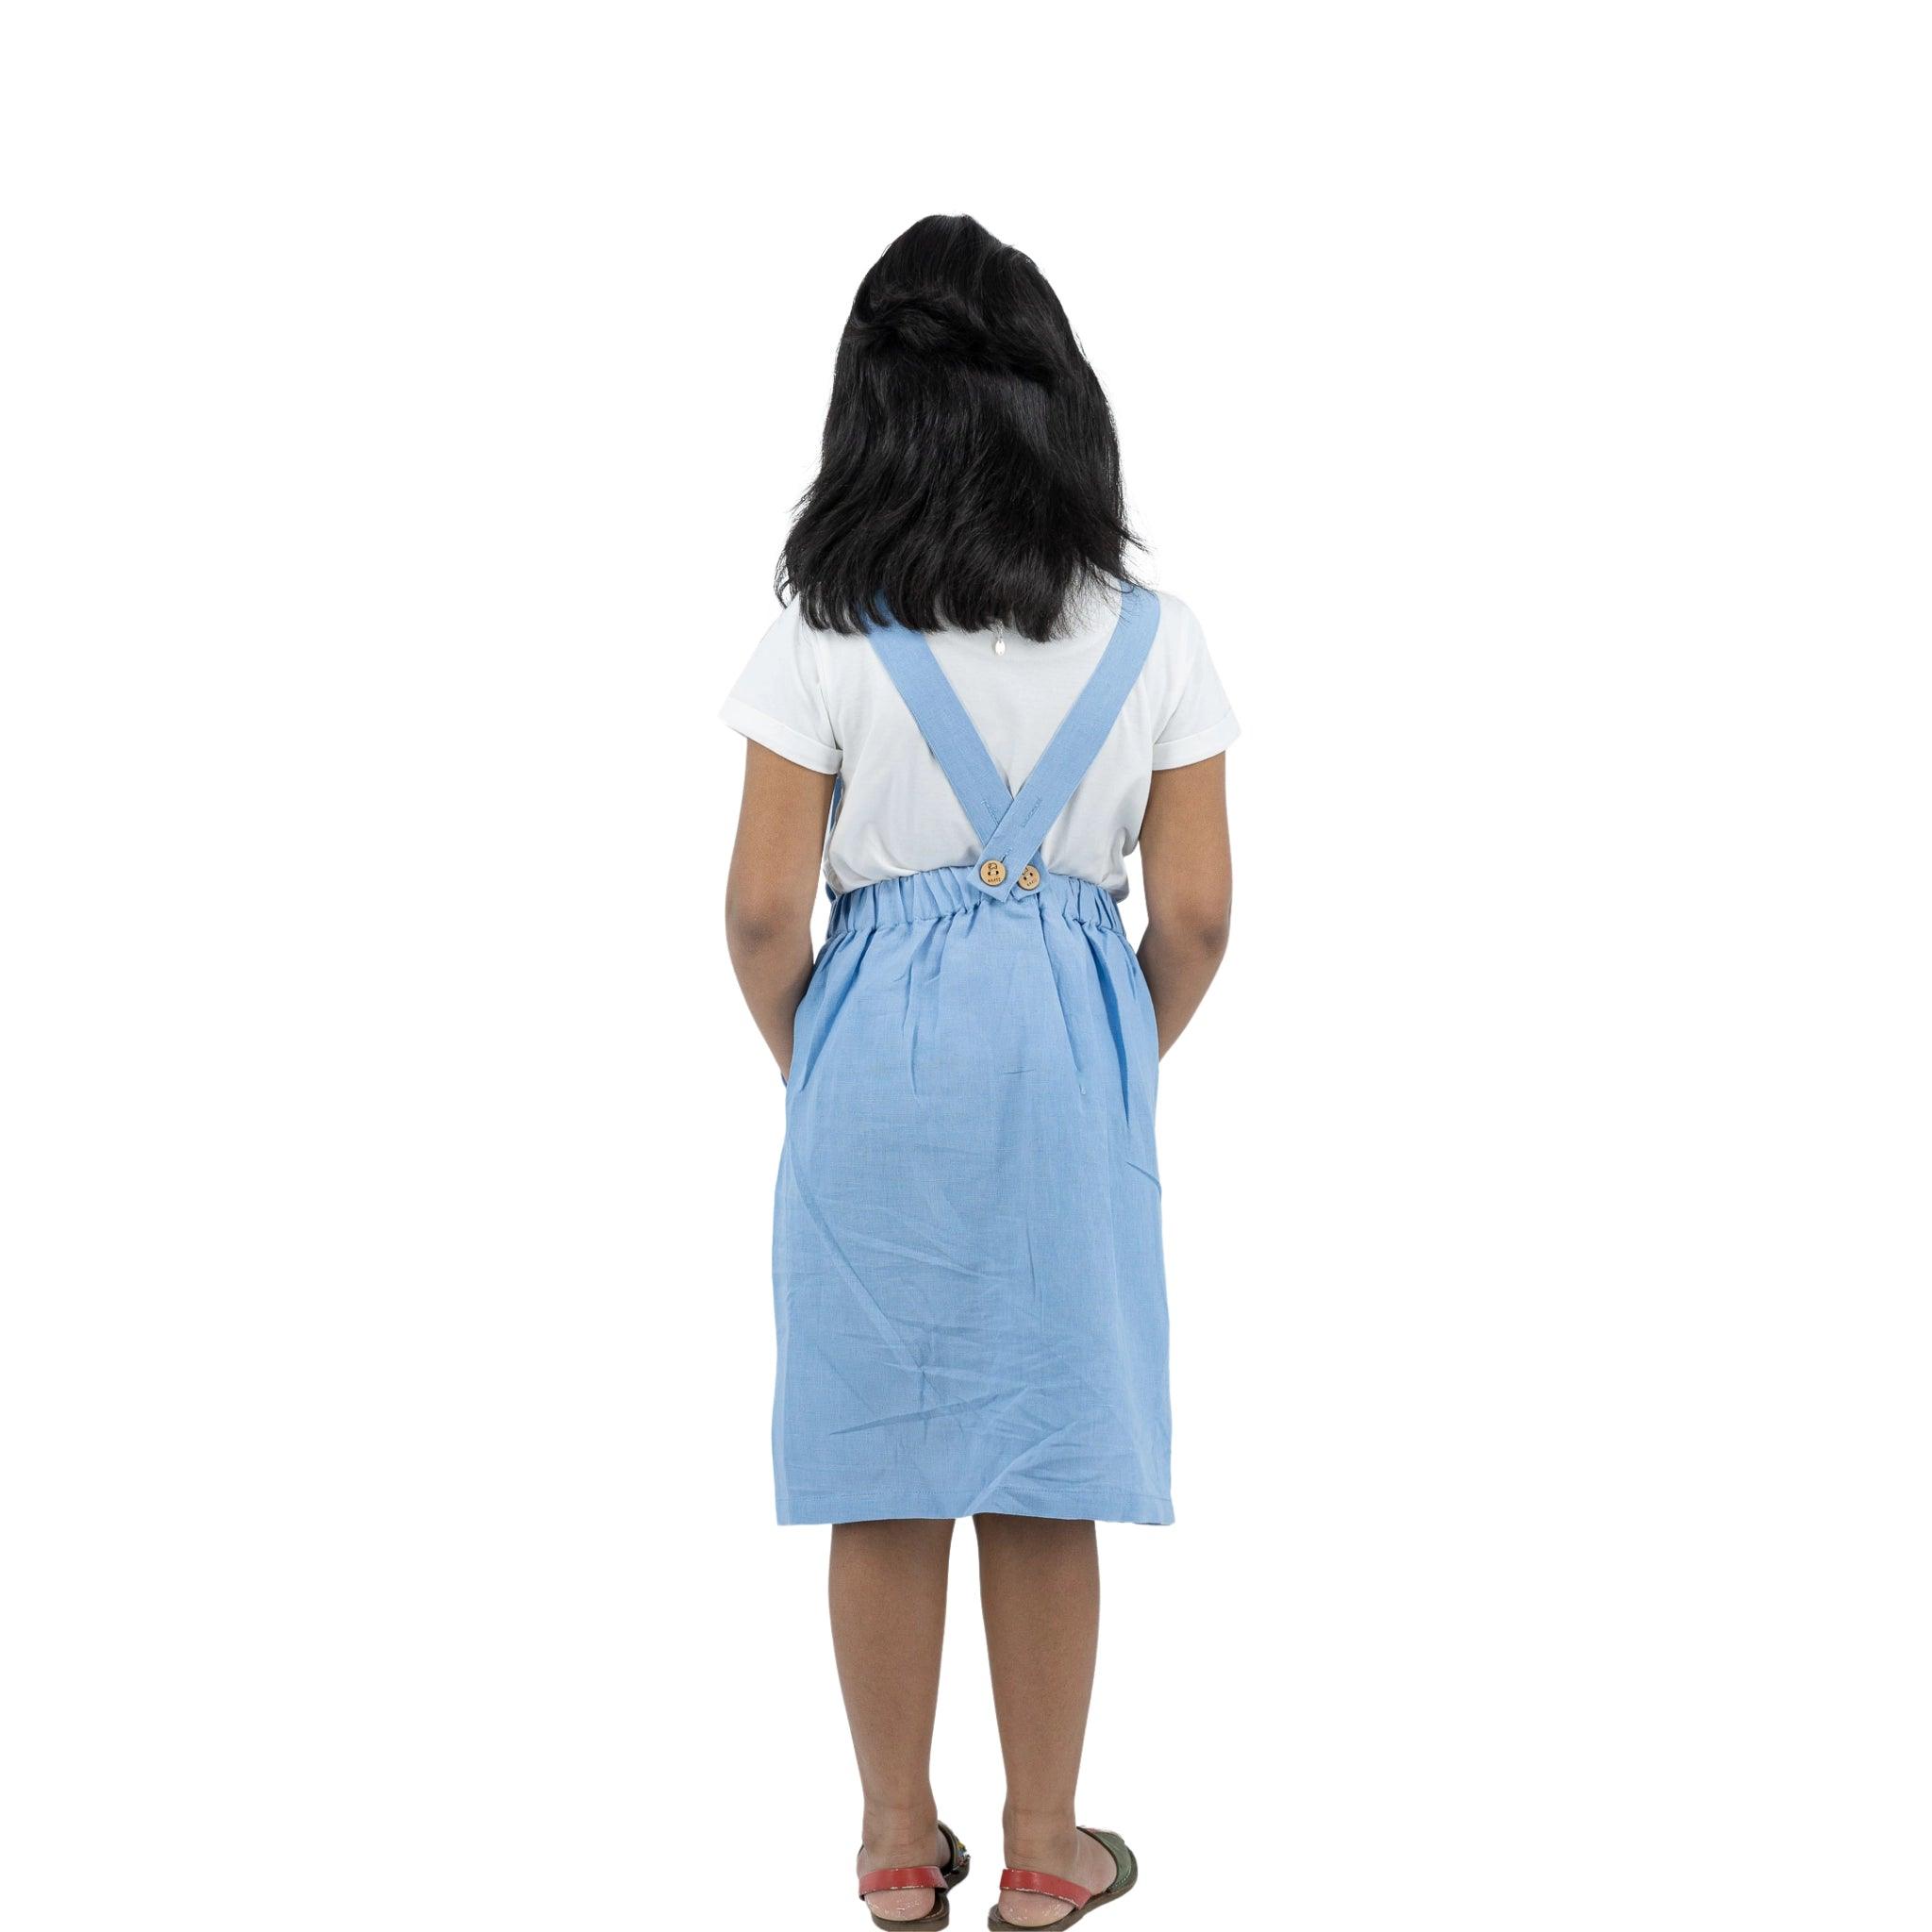 A woman stands with her back to the camera, wearing a white t-shirt and a Karee cerulean blue linen pinafore, isolated on a white background.